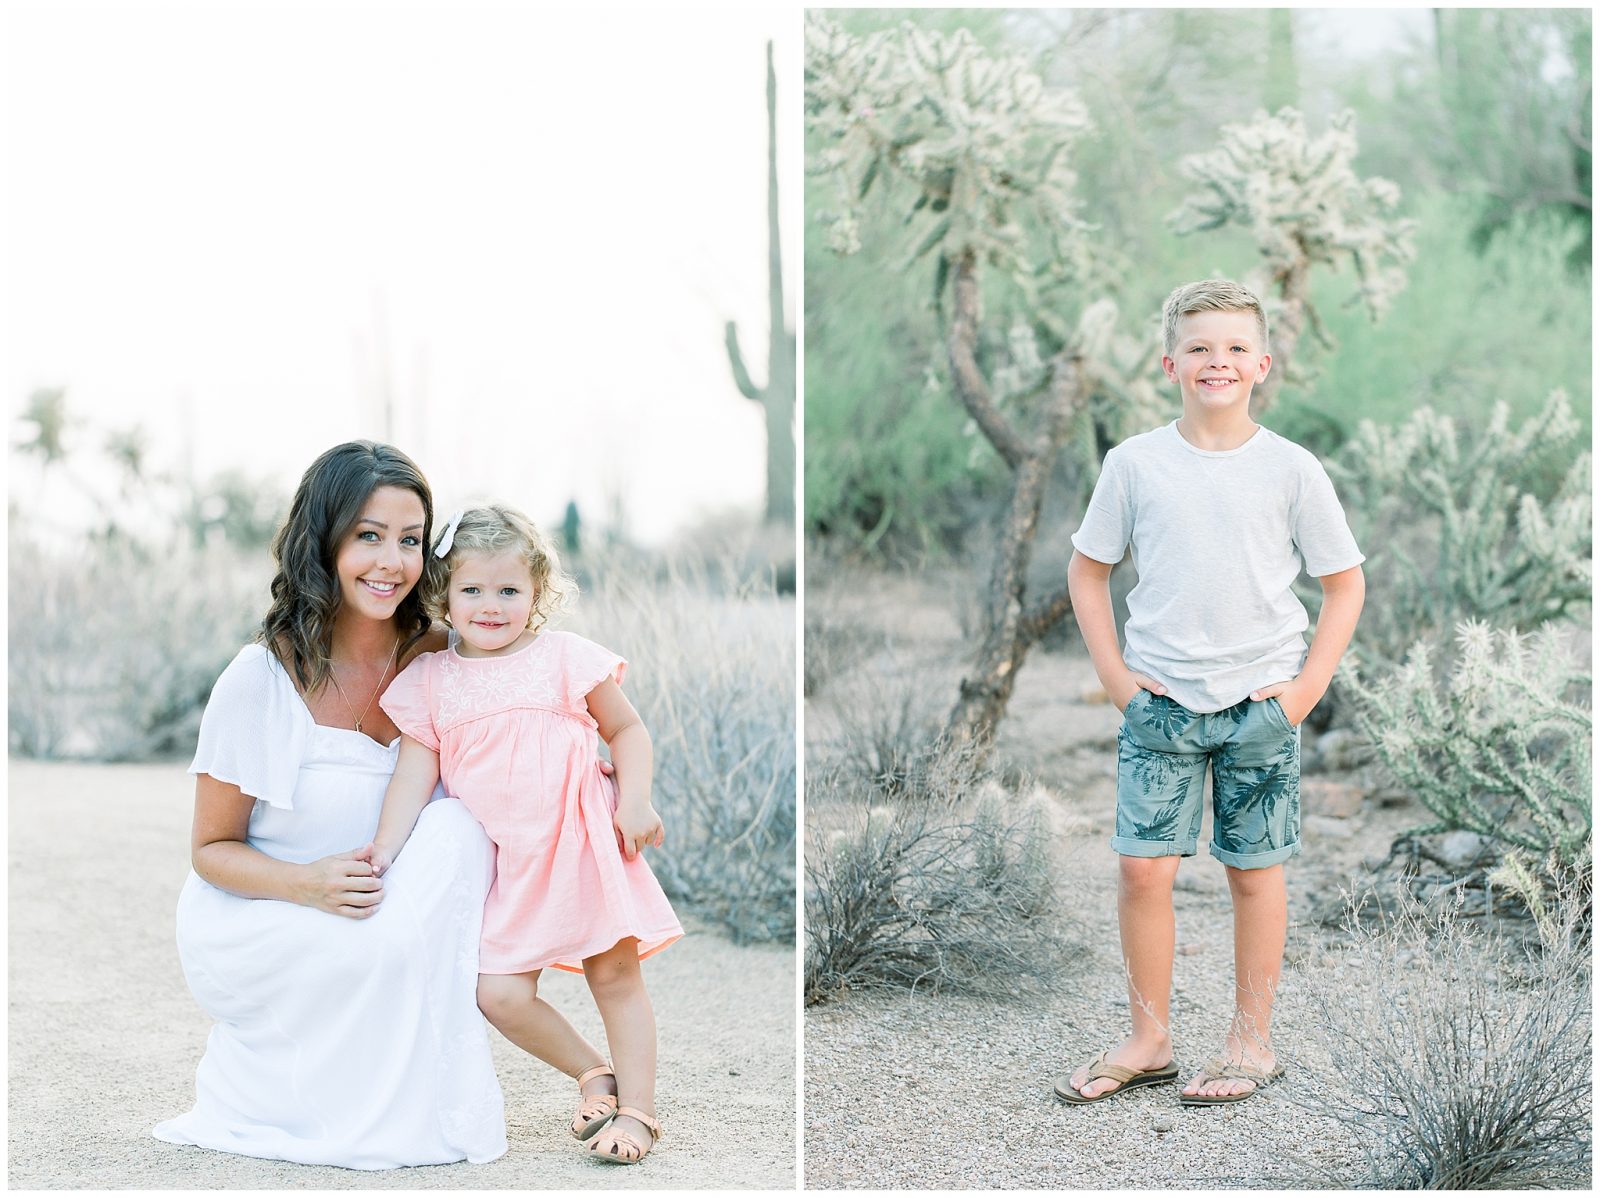 Mesa, Arizona Desert Family Session at the Wind Cave Trail by Aly Kirk Photo